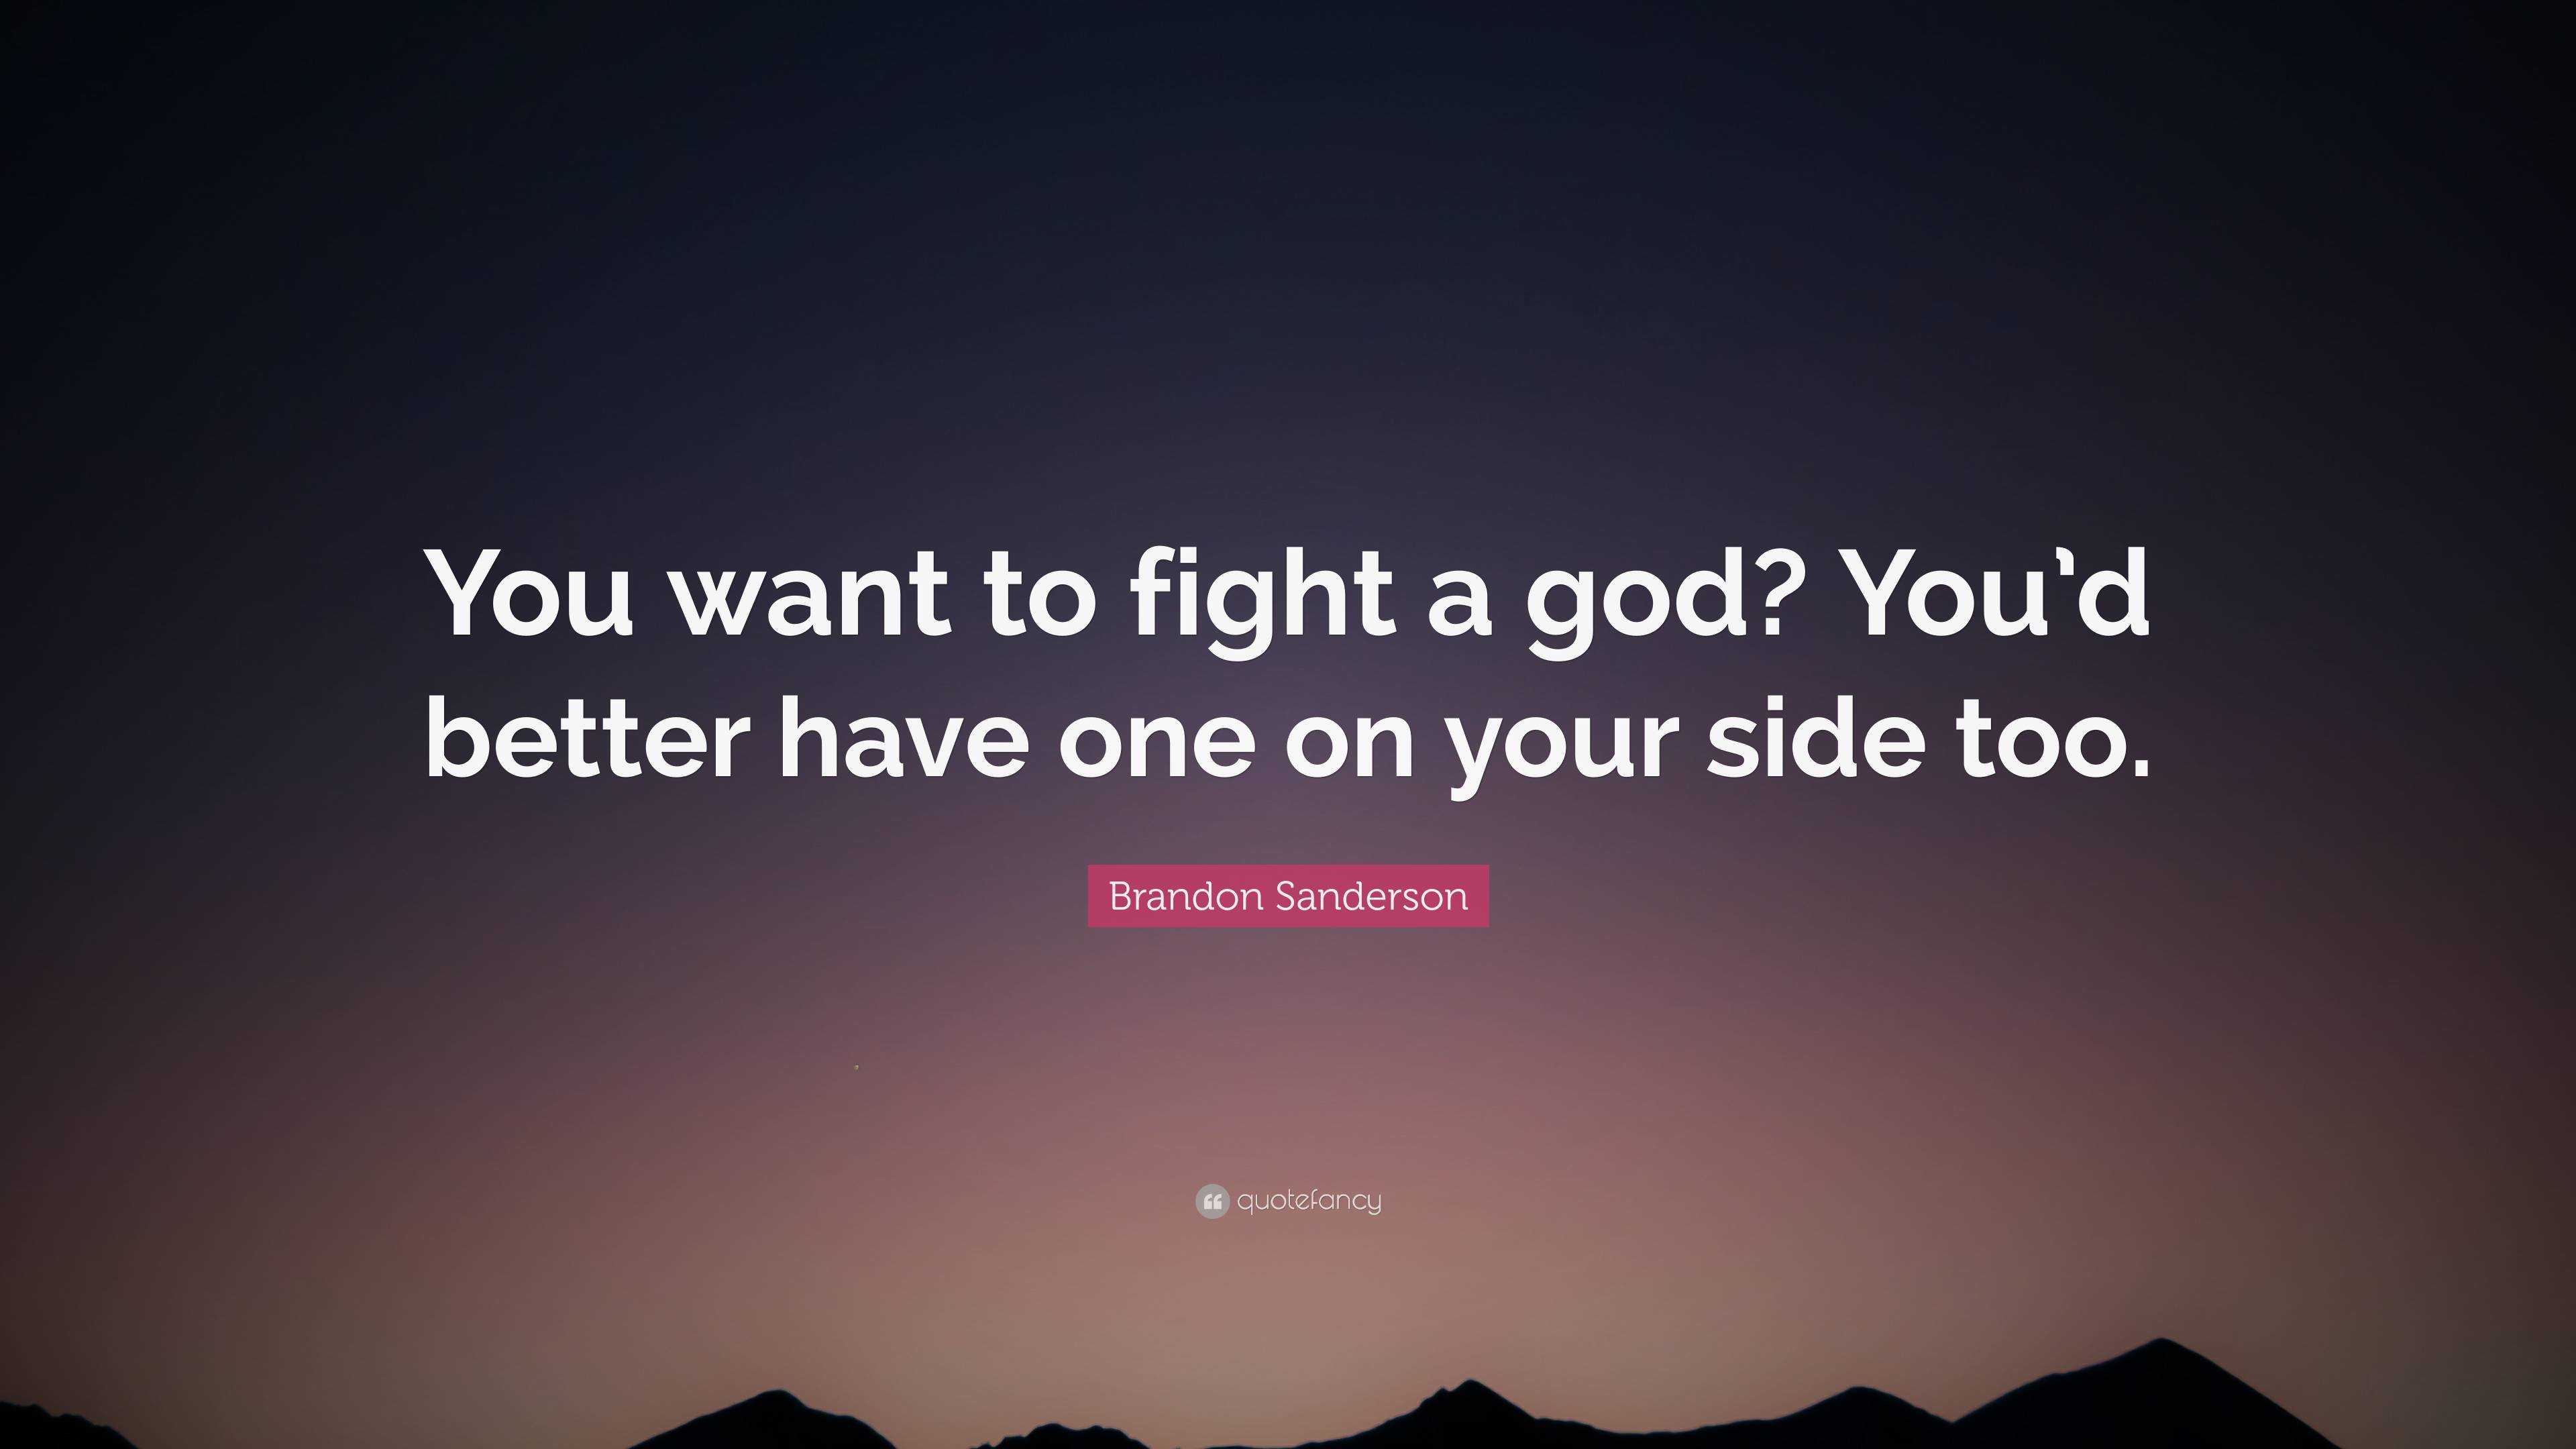 Brandon Sanderson Quote: “You want to fight a god? You'd better